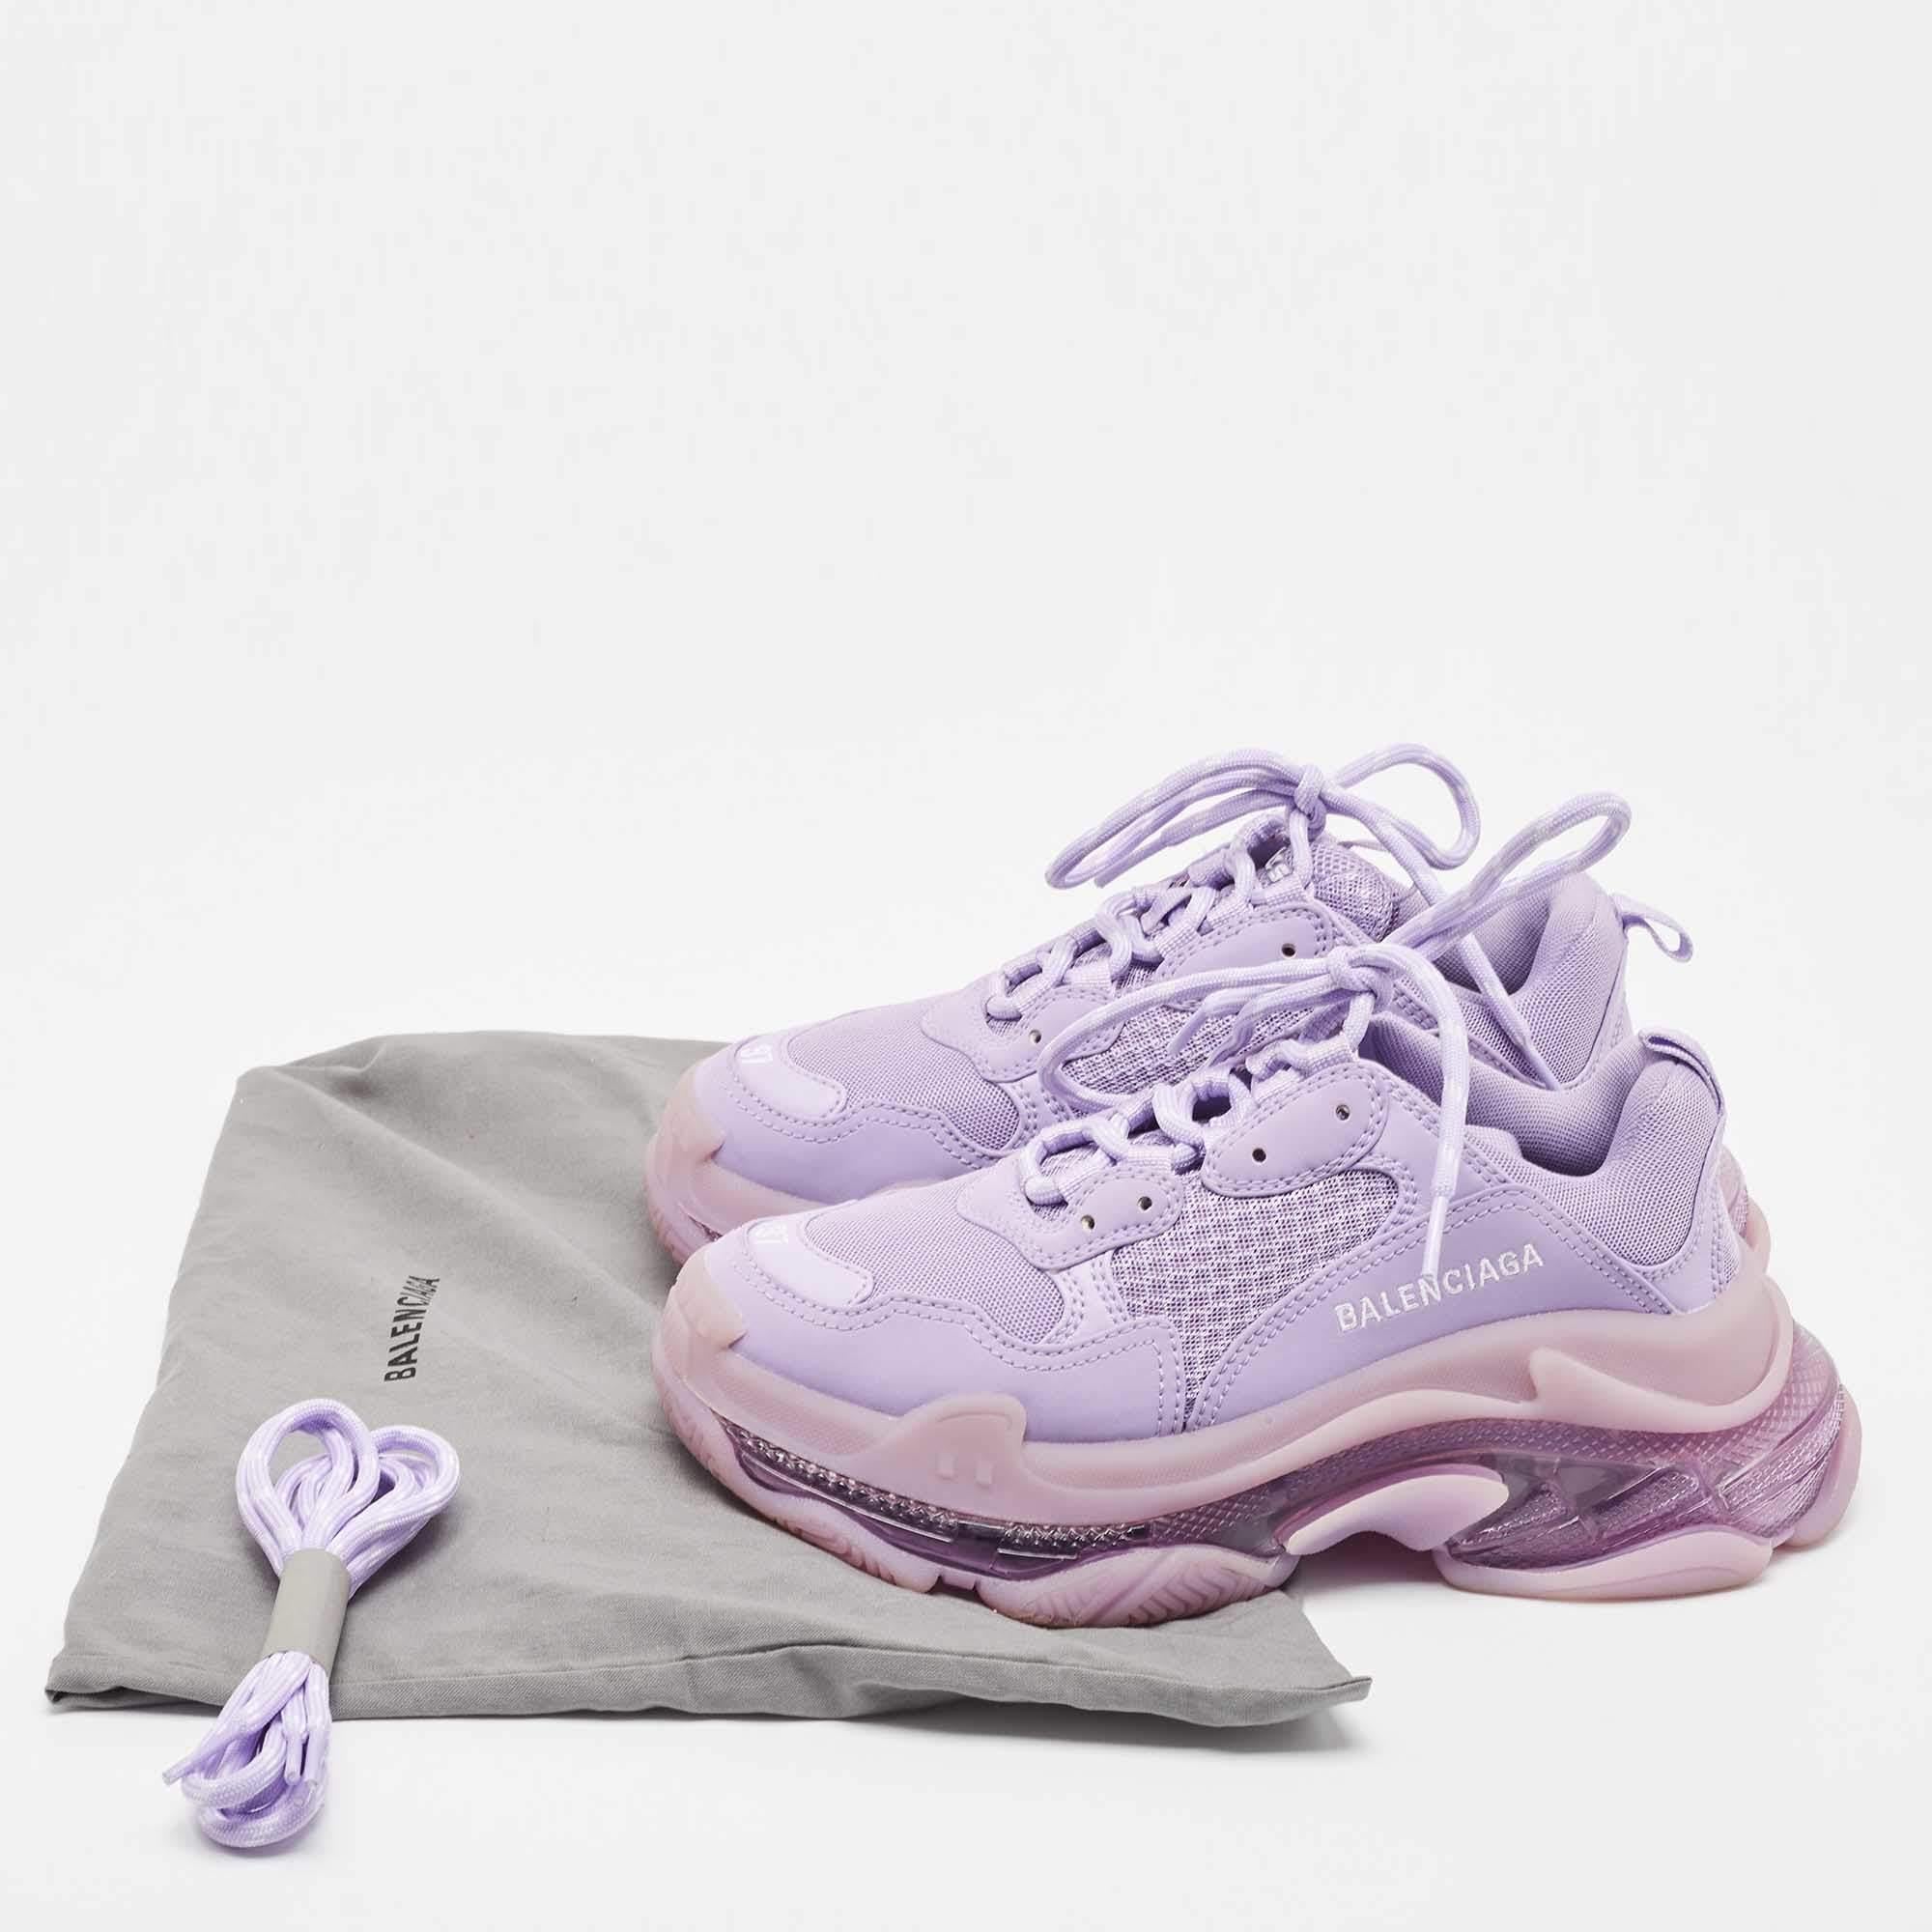 Balenciaga Purple Mesh and Leather Triple S Clear Sole Sneakers Size 37 5